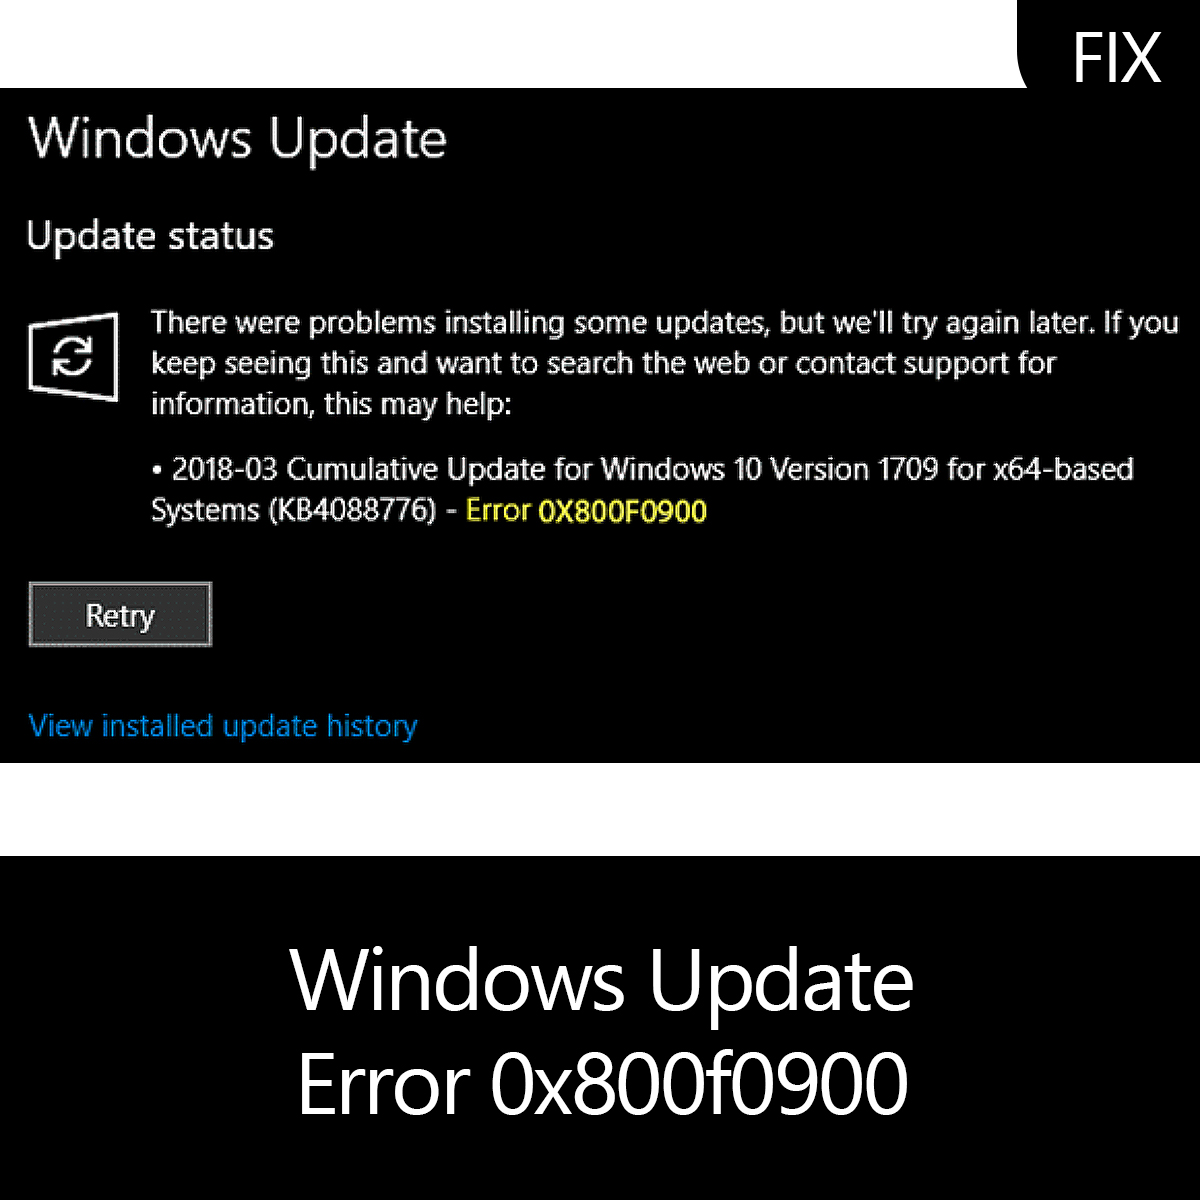 kb4088776 fails to install